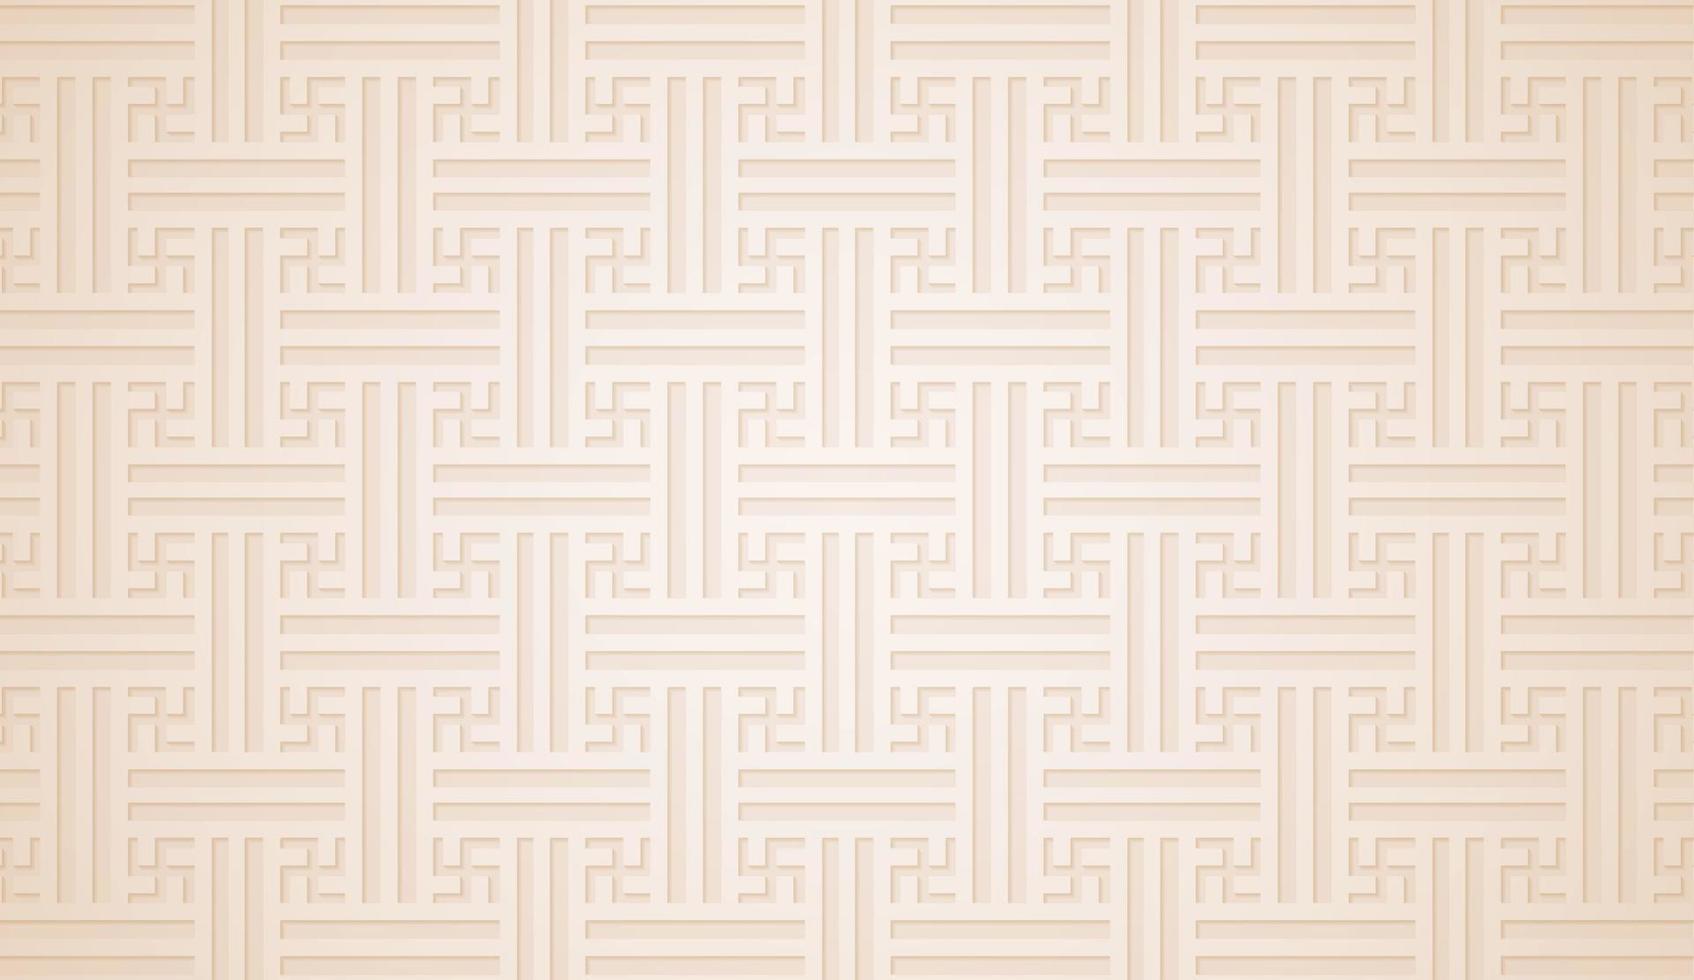 Flat ancient pattern background template vector